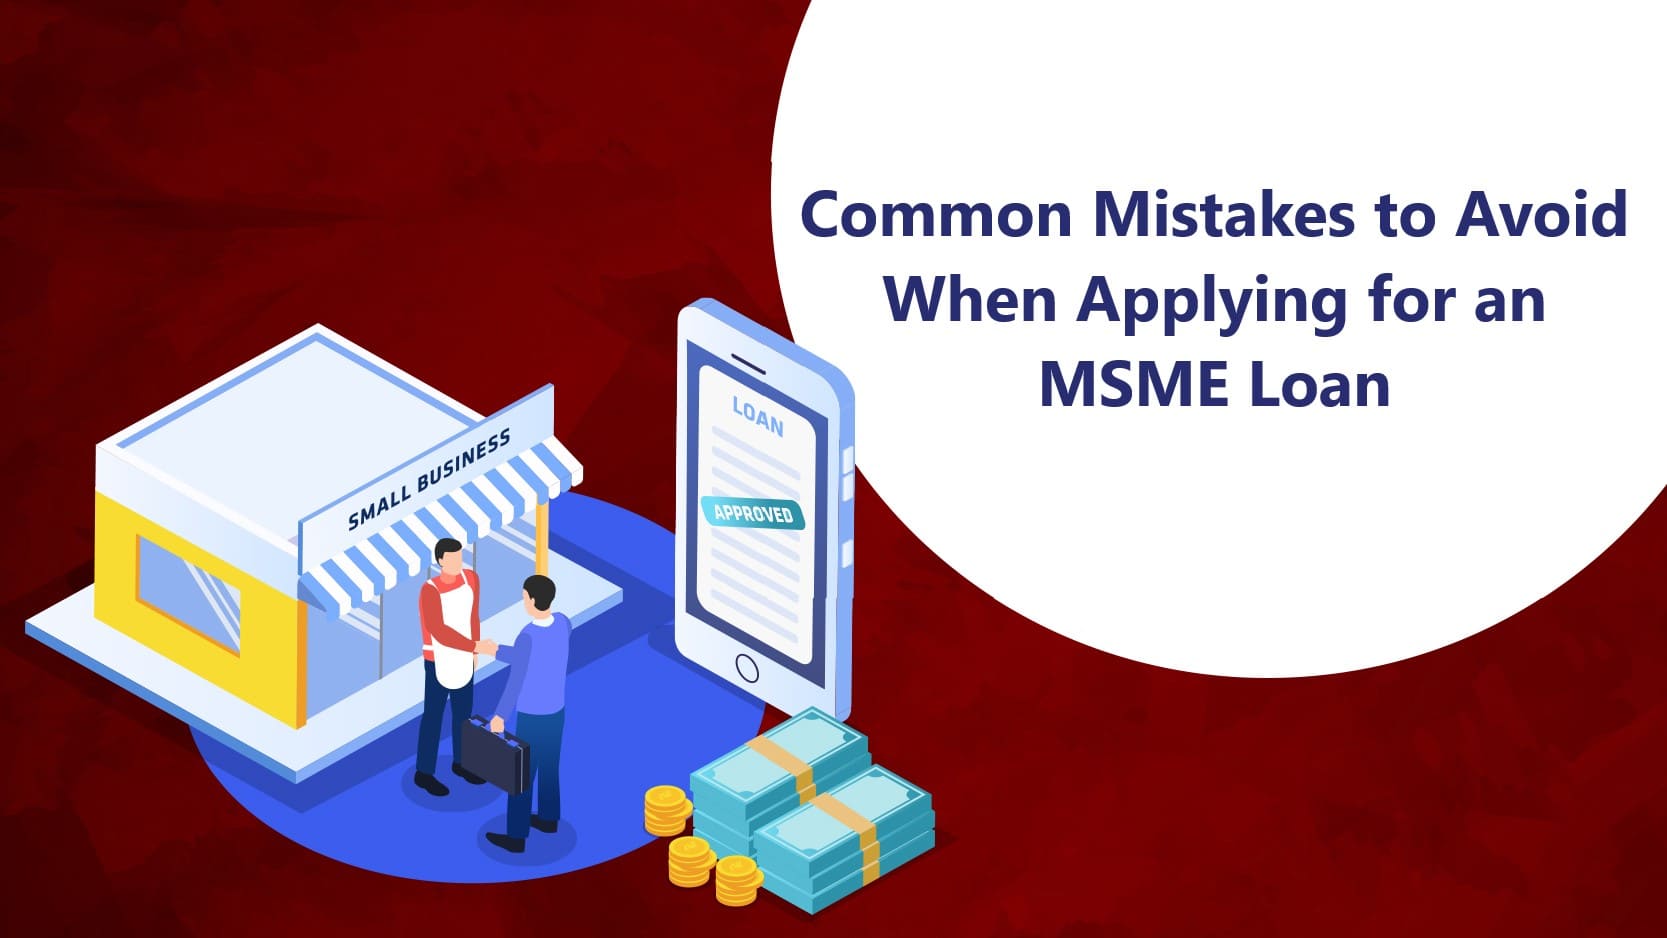 Common Mistakes to Avoid When Applying for an MSME Loan